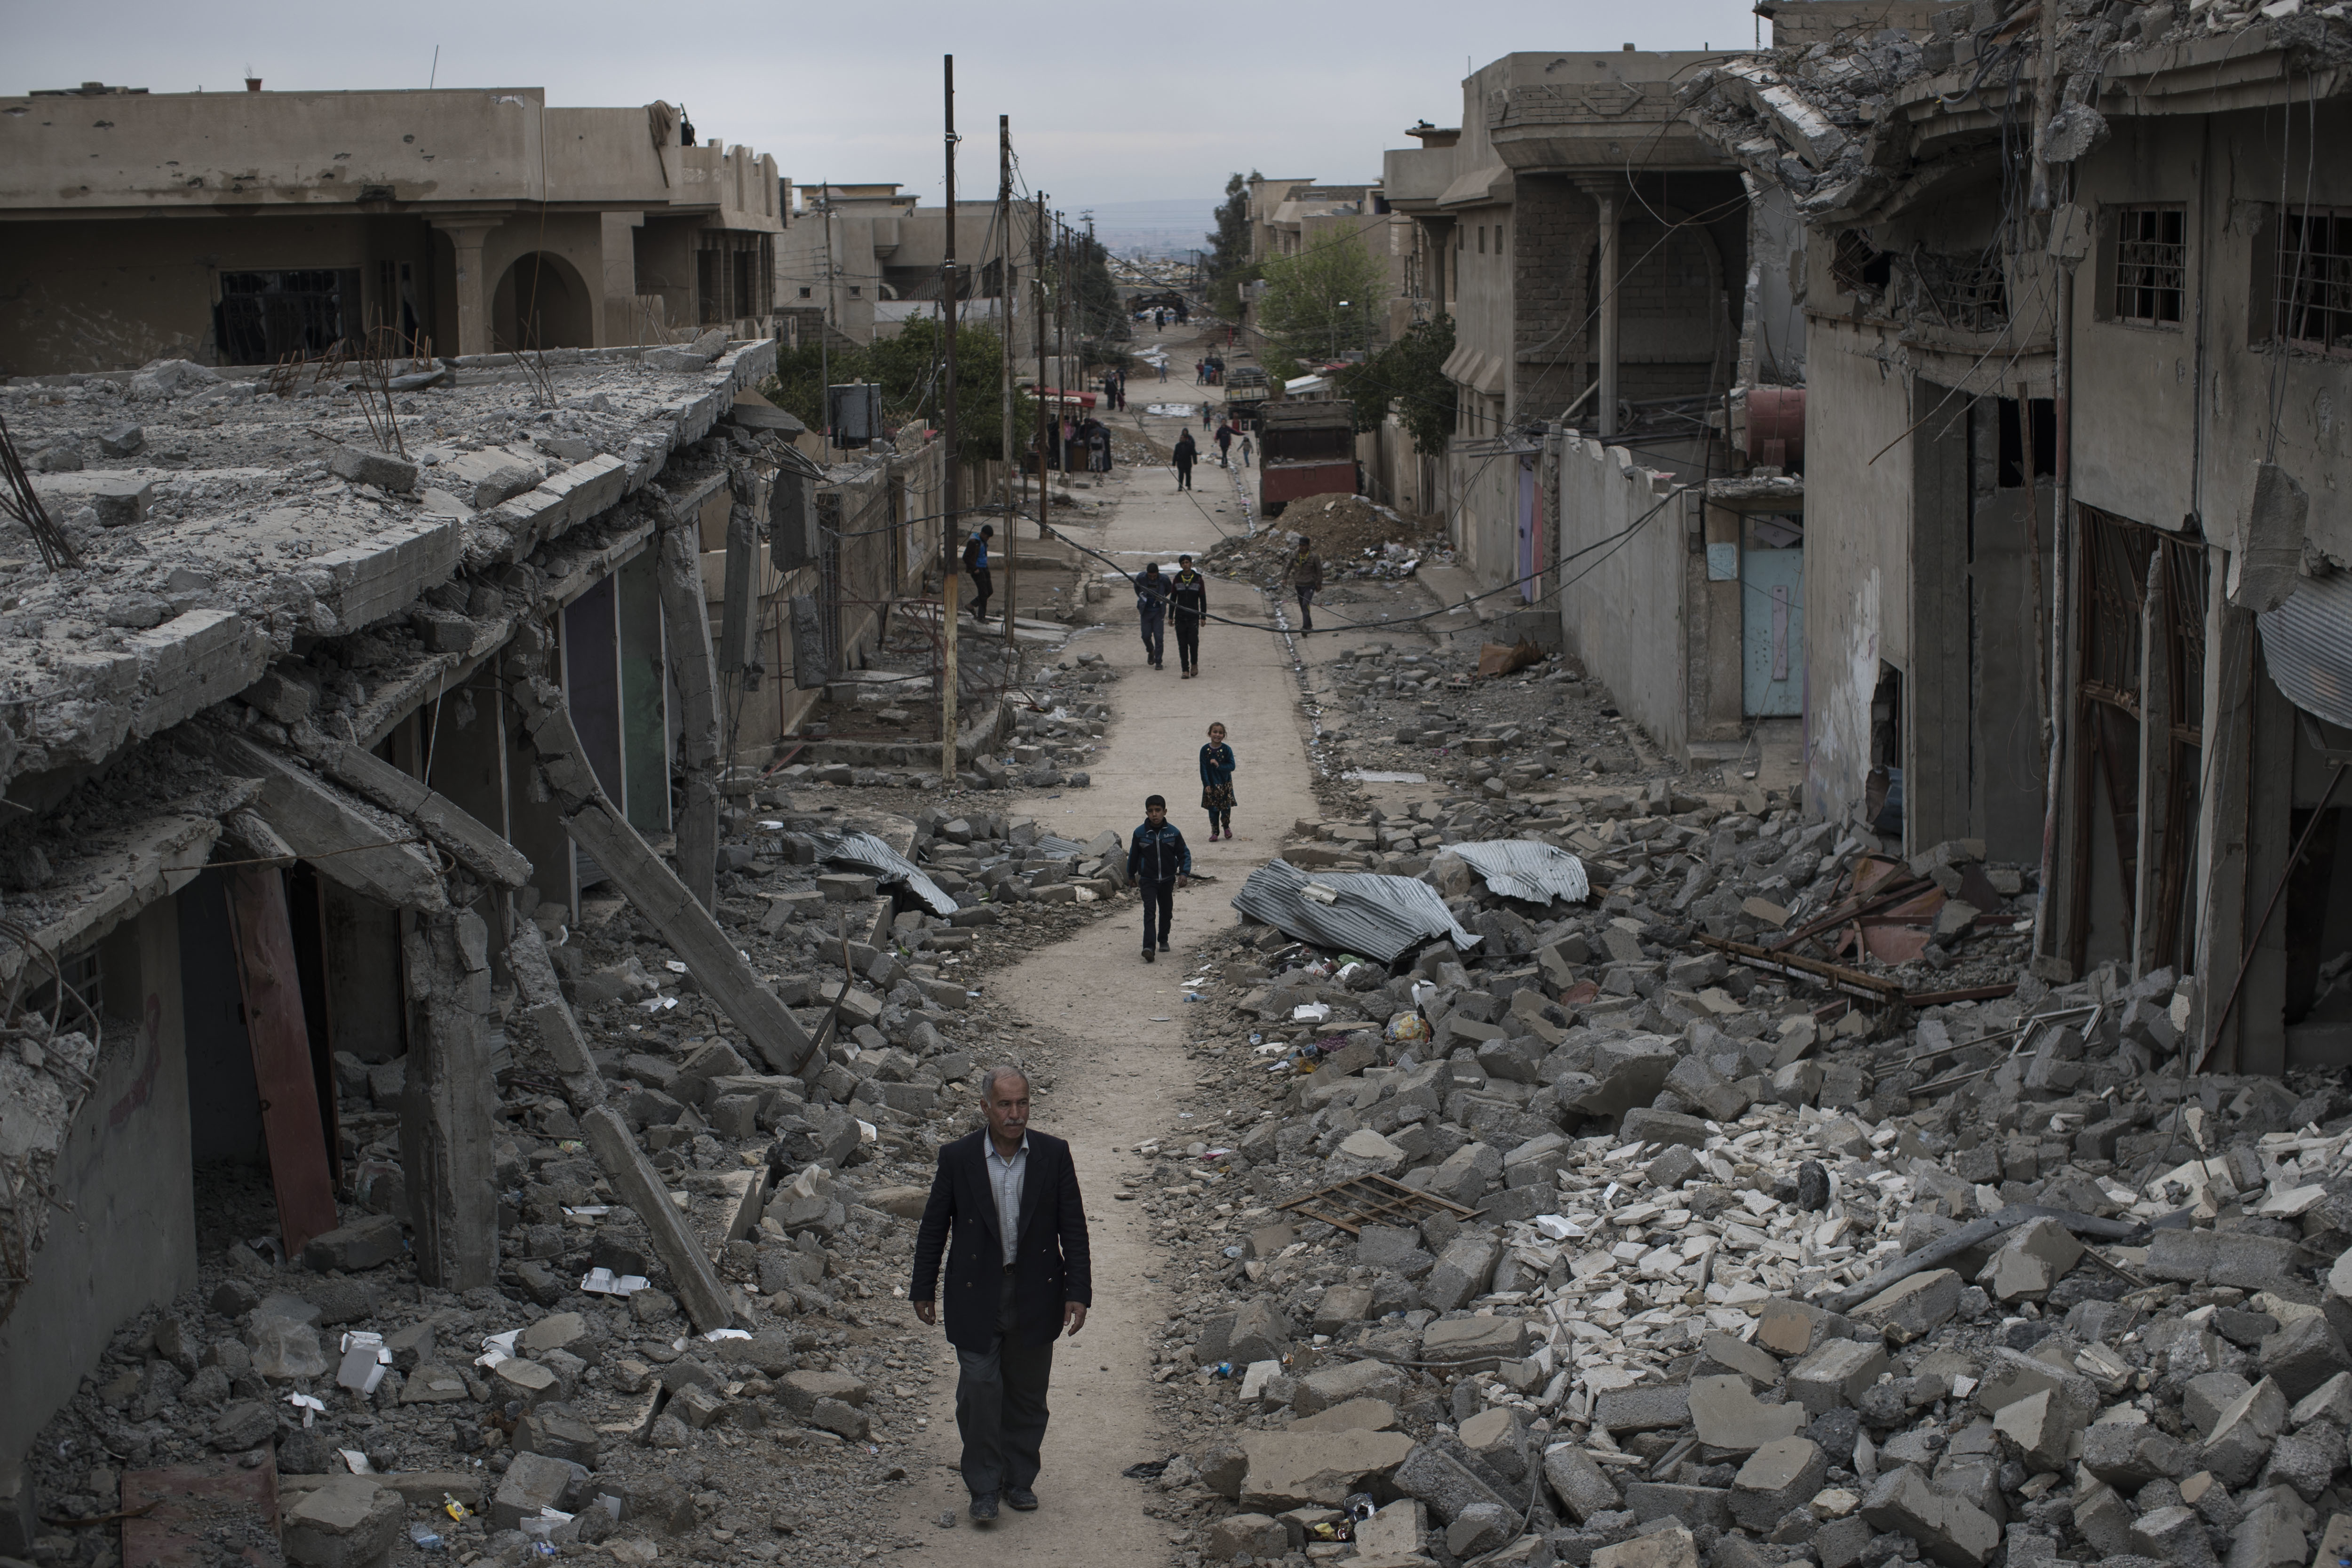 Iraqi civilians walk in a neighborhood recently liberated by Iraqi security forces on the western side of Mosul, Iraq, Wednesday, March 22, 2017. (AP Photo/Felipe Dana)